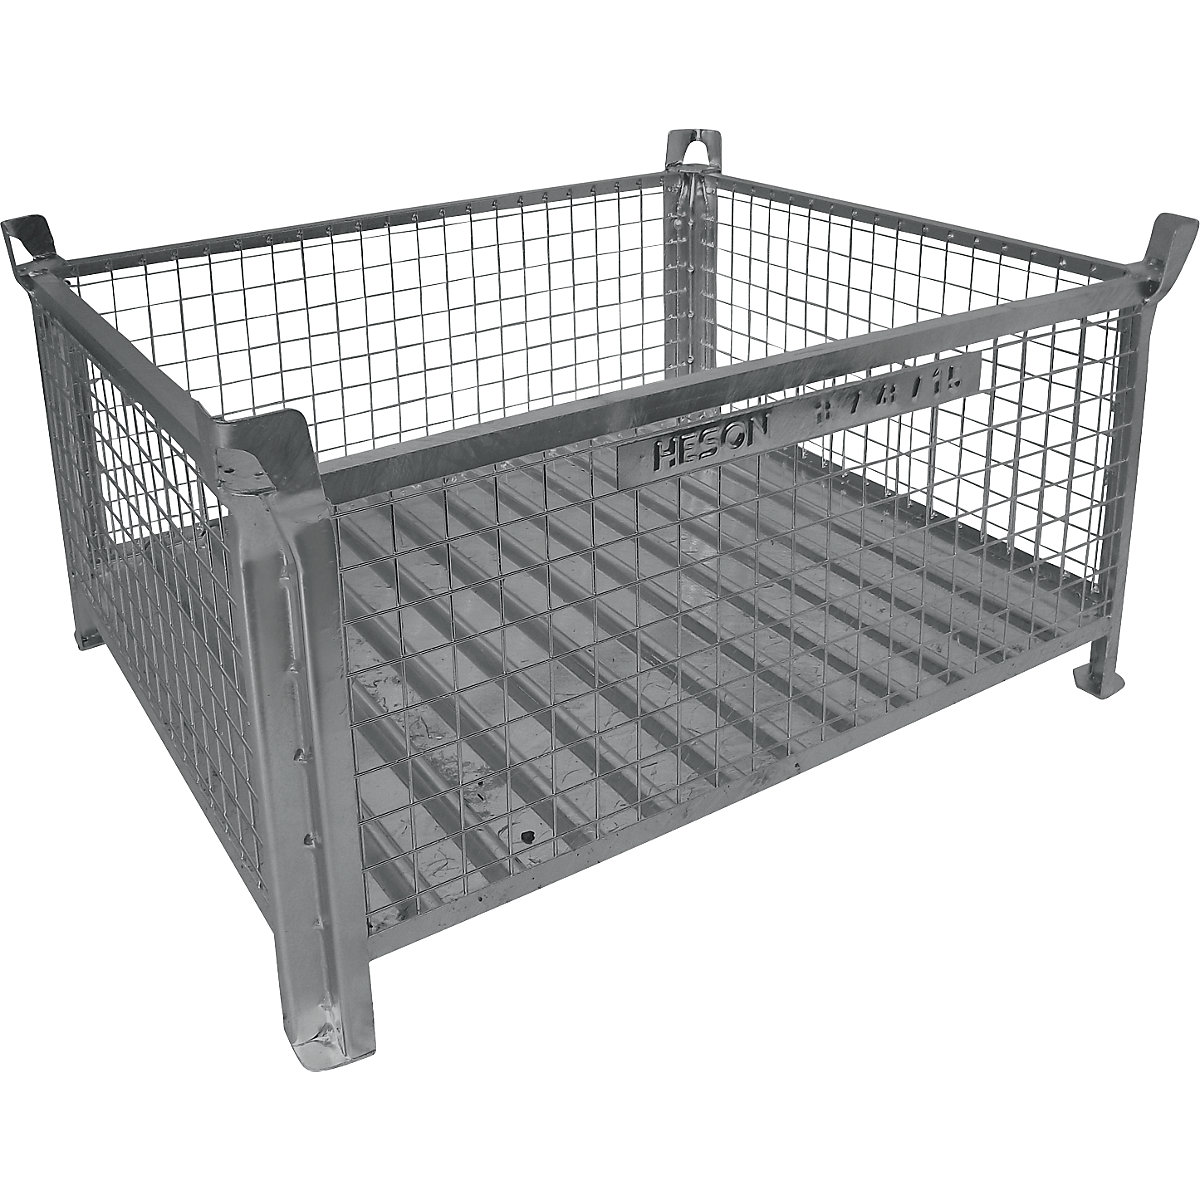 Box pallet with sheet steel base – Heson